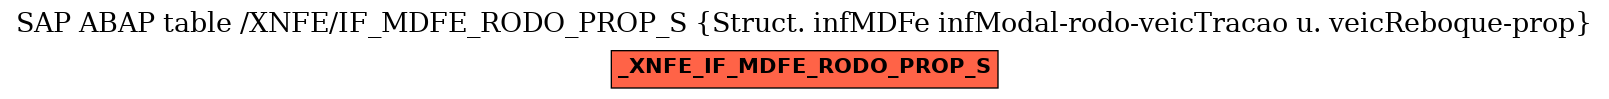 E-R Diagram for table /XNFE/IF_MDFE_RODO_PROP_S (Struct. infMDFe infModal-rodo-veicTracao u. veicReboque-prop)